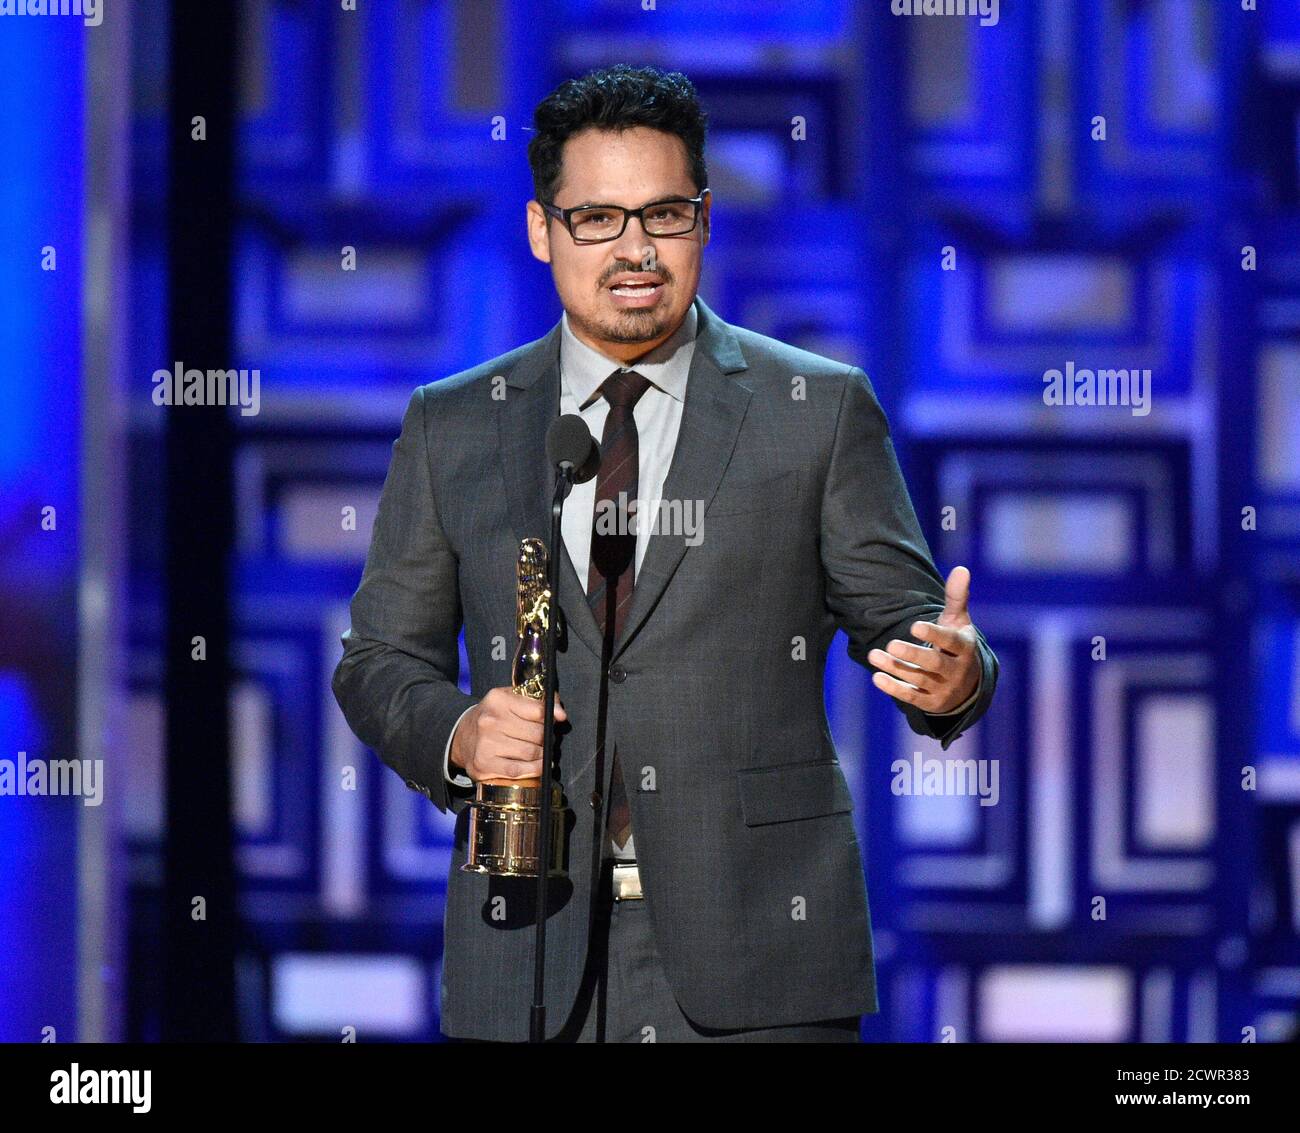 Michael Pena accepts the award for Special Achievement in Film for the cast  of "Cesar Chavez" during the 2014 NCLR ALMA Awards at the Pasadena Civic  Auditorium in Pasadena, California October 10,